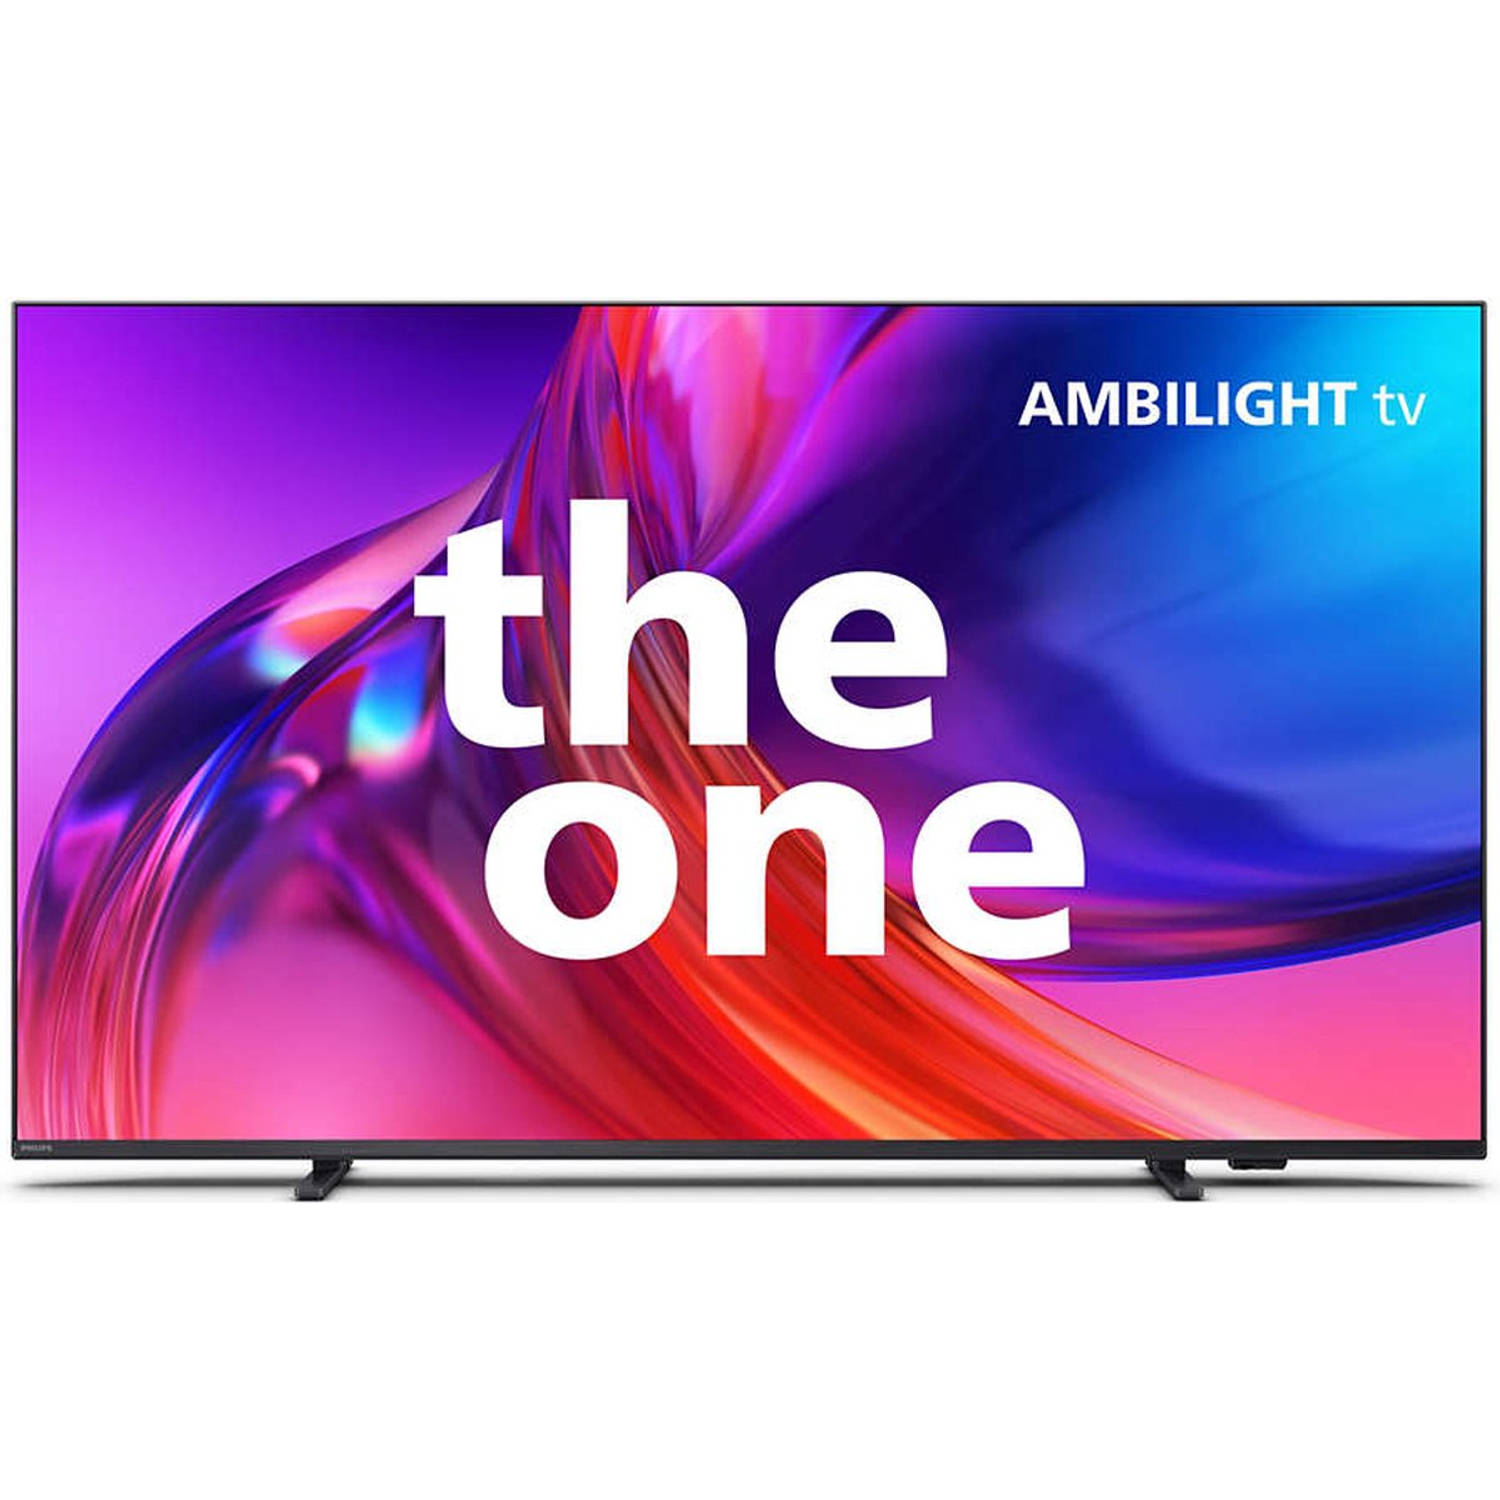 Philips The One 50PUS8508/12 smart tv - 50 inch - 4K LED